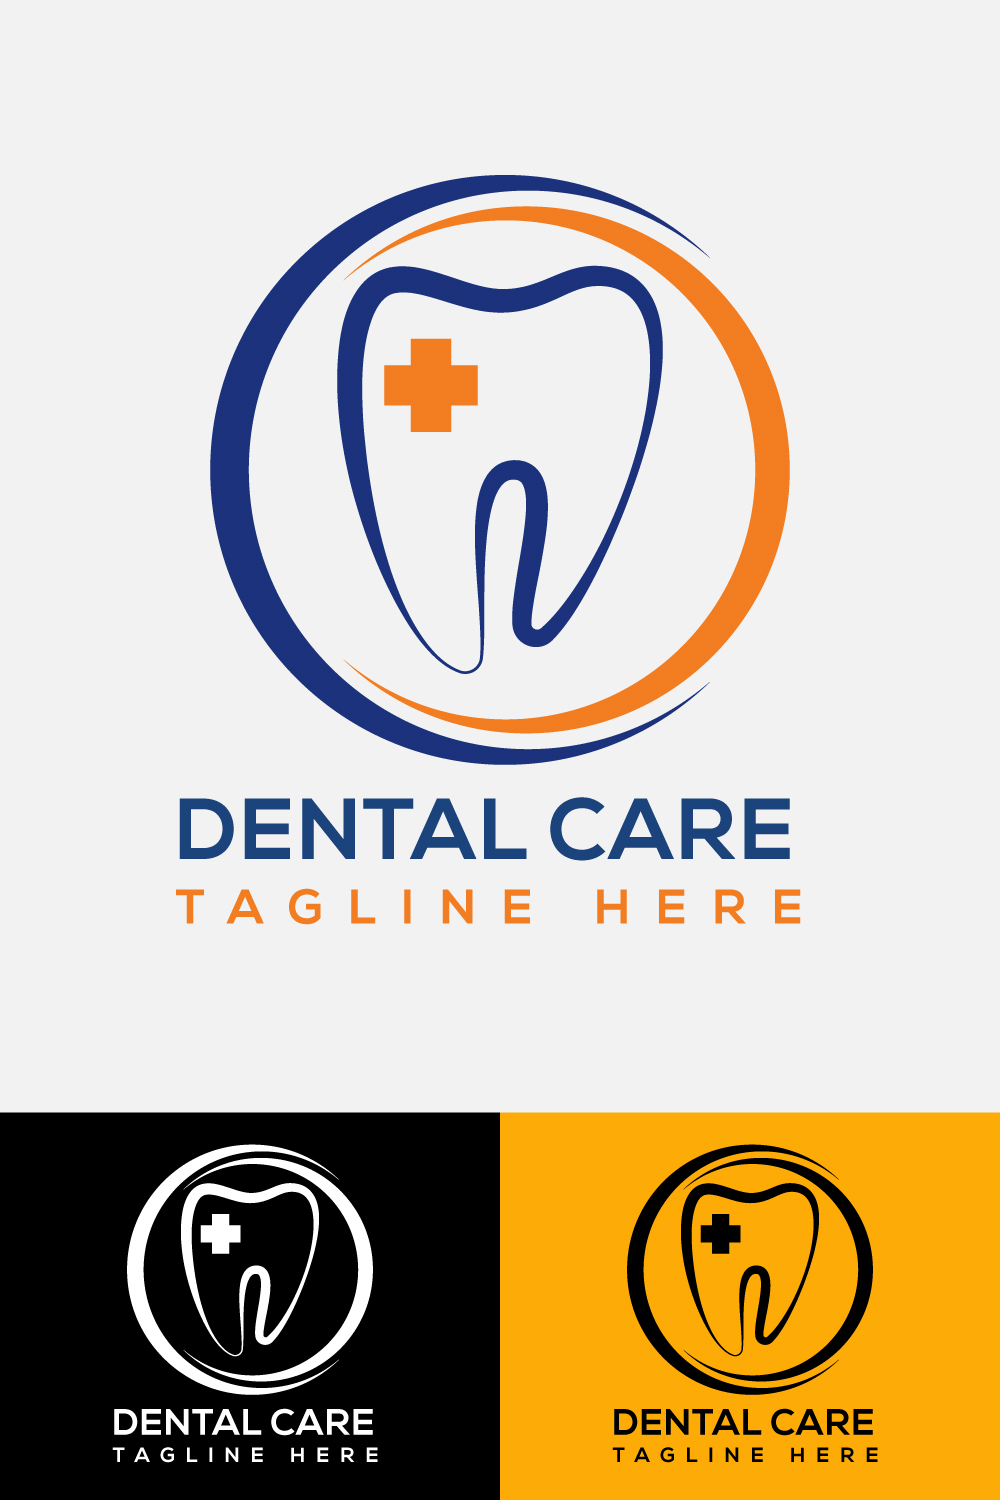 An image pack of amazing tooth shape logos.